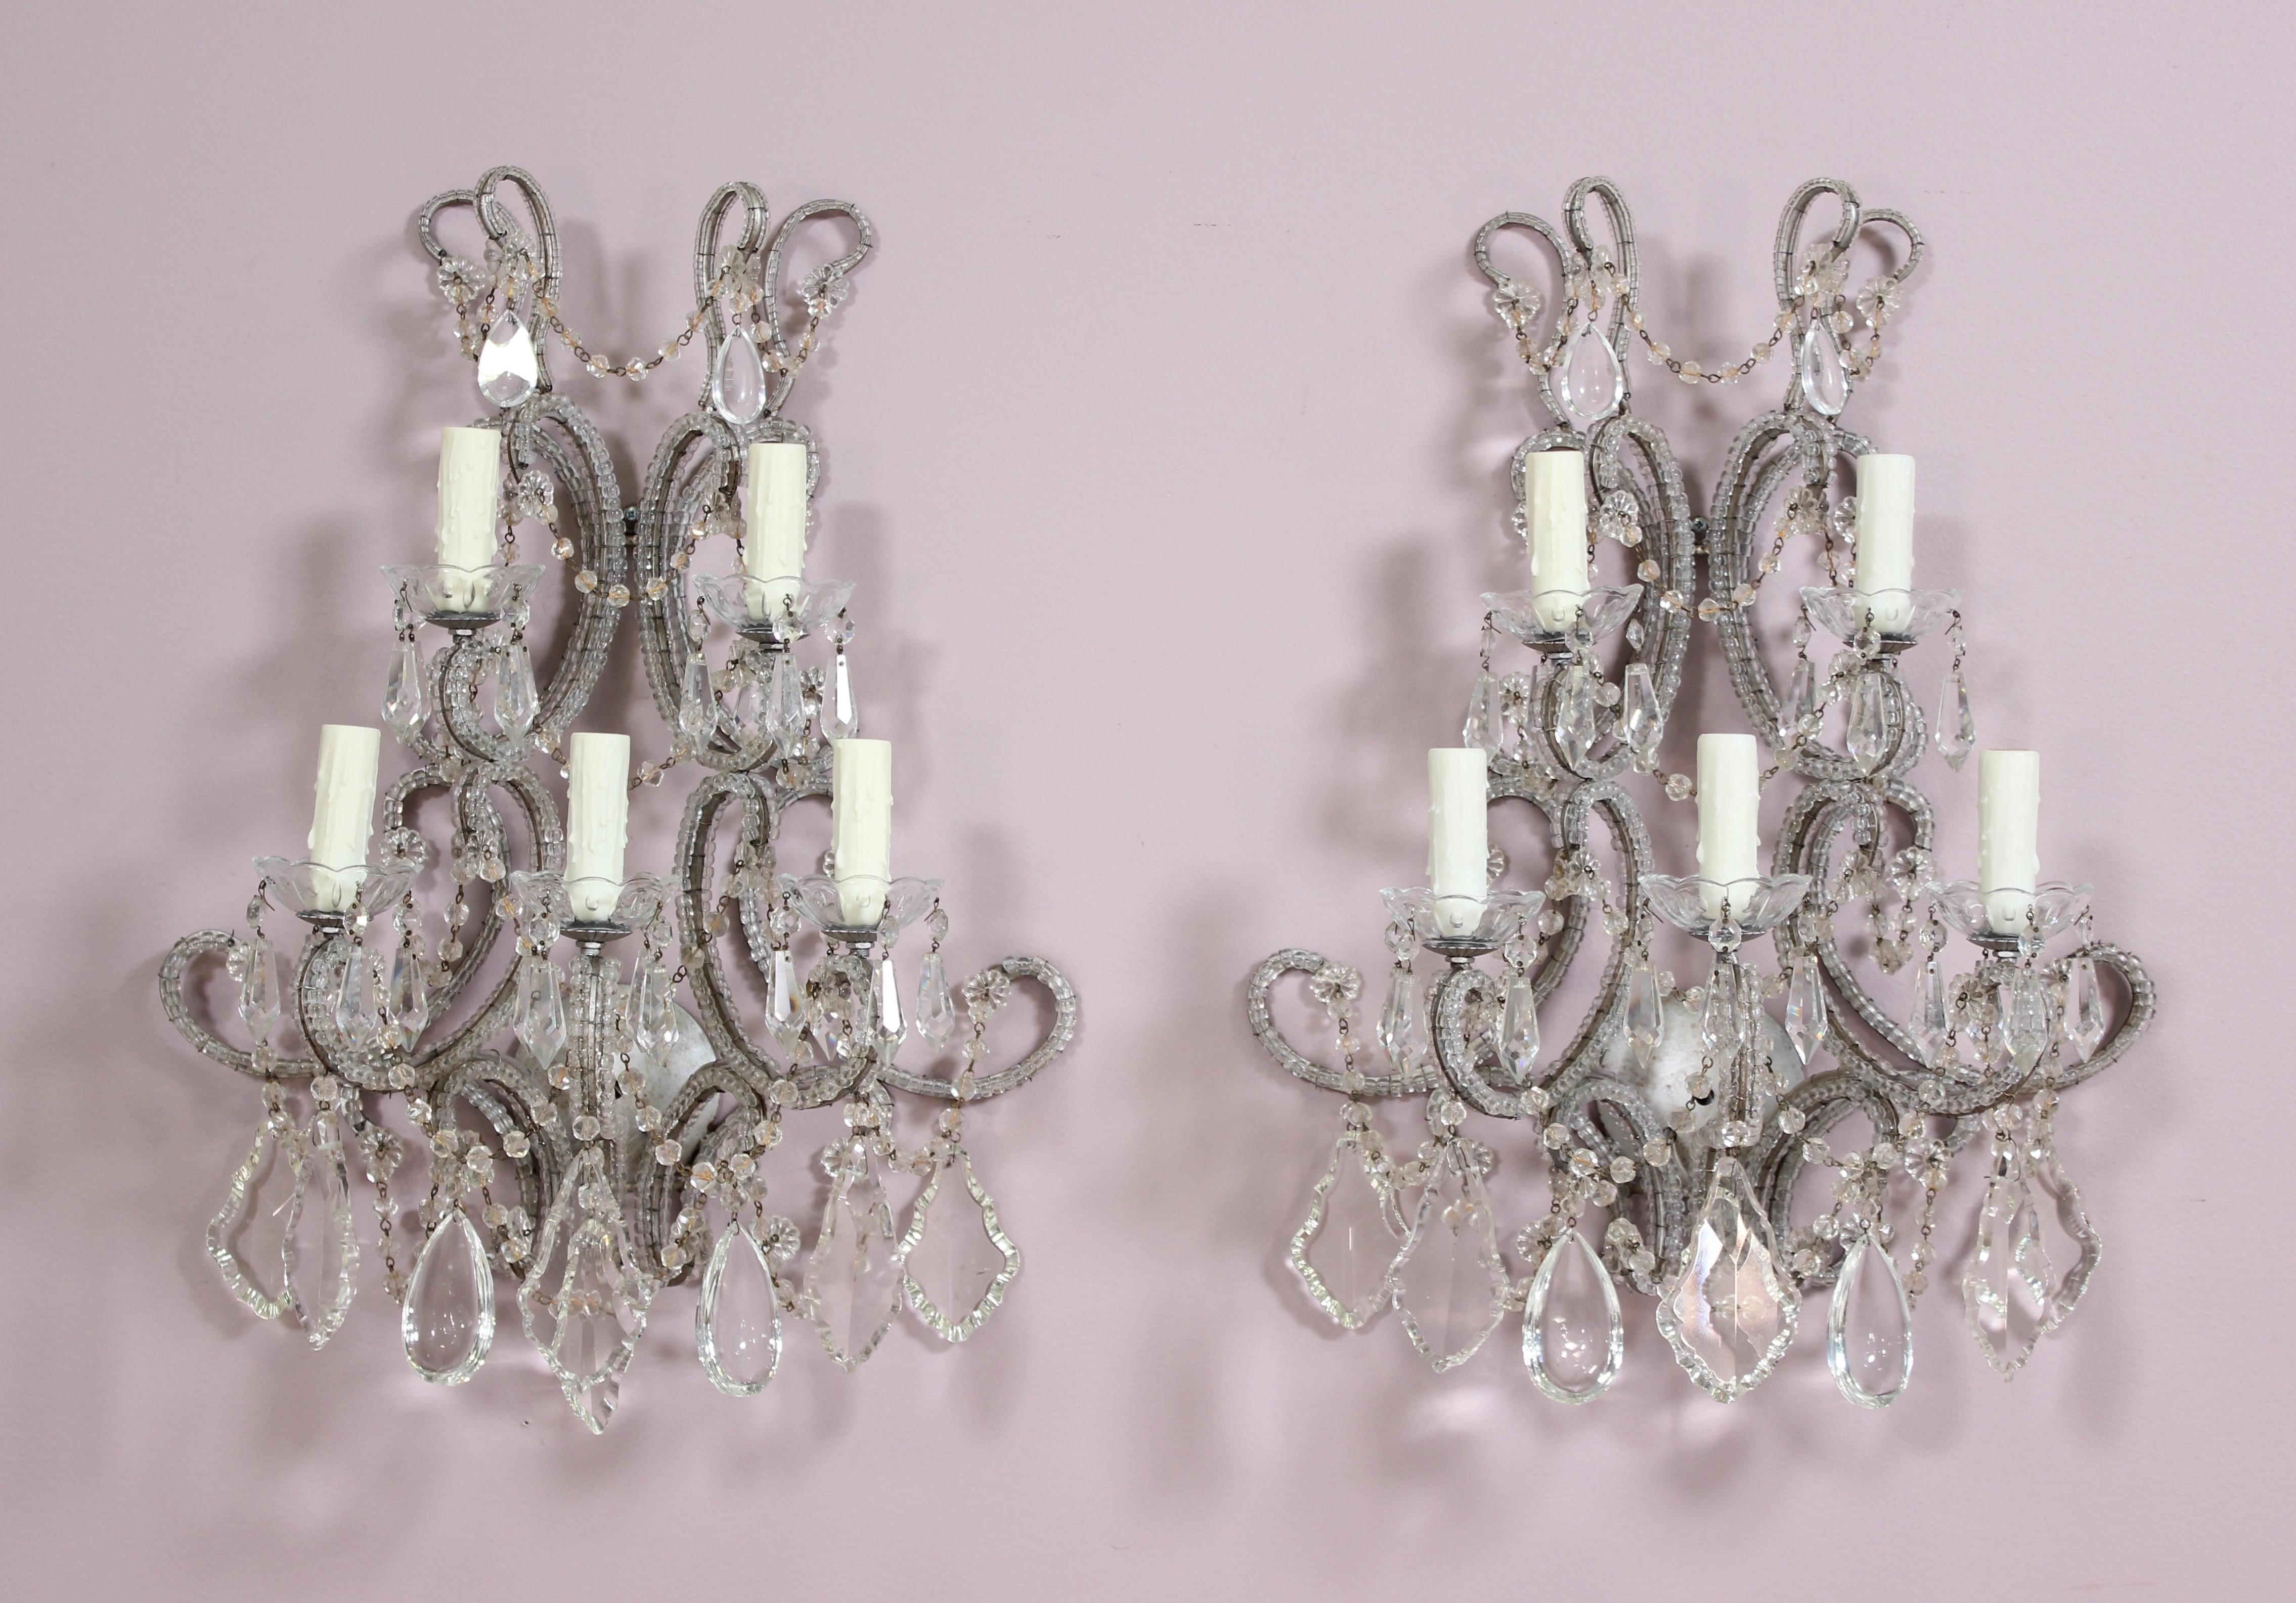 Impressive, pair of French-style crystal beaded and silver leafed iron sconces. These one of a kind sconces consist of both antique and new elements including glass “macaroni” glass beaded frames, English cut bead swags, and an assortment of French